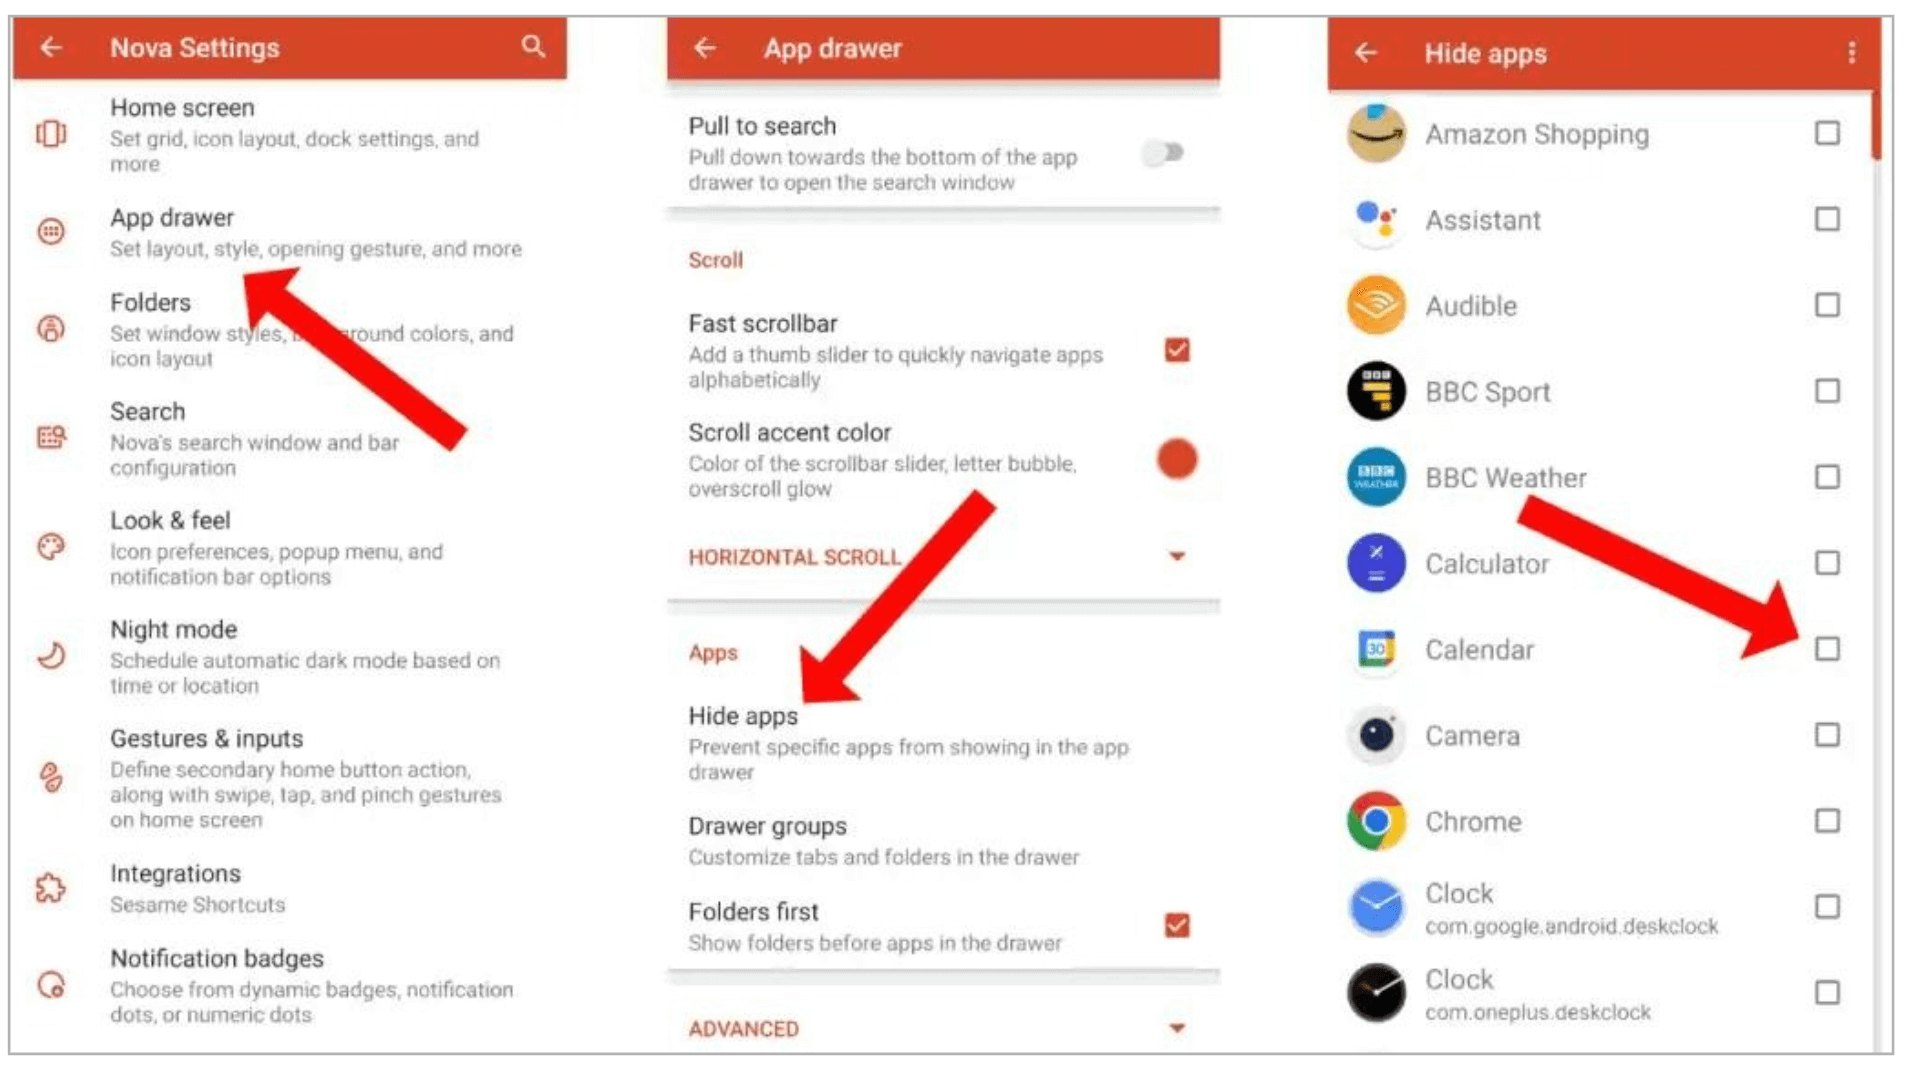 Use Nova Launcher to Hide Apps